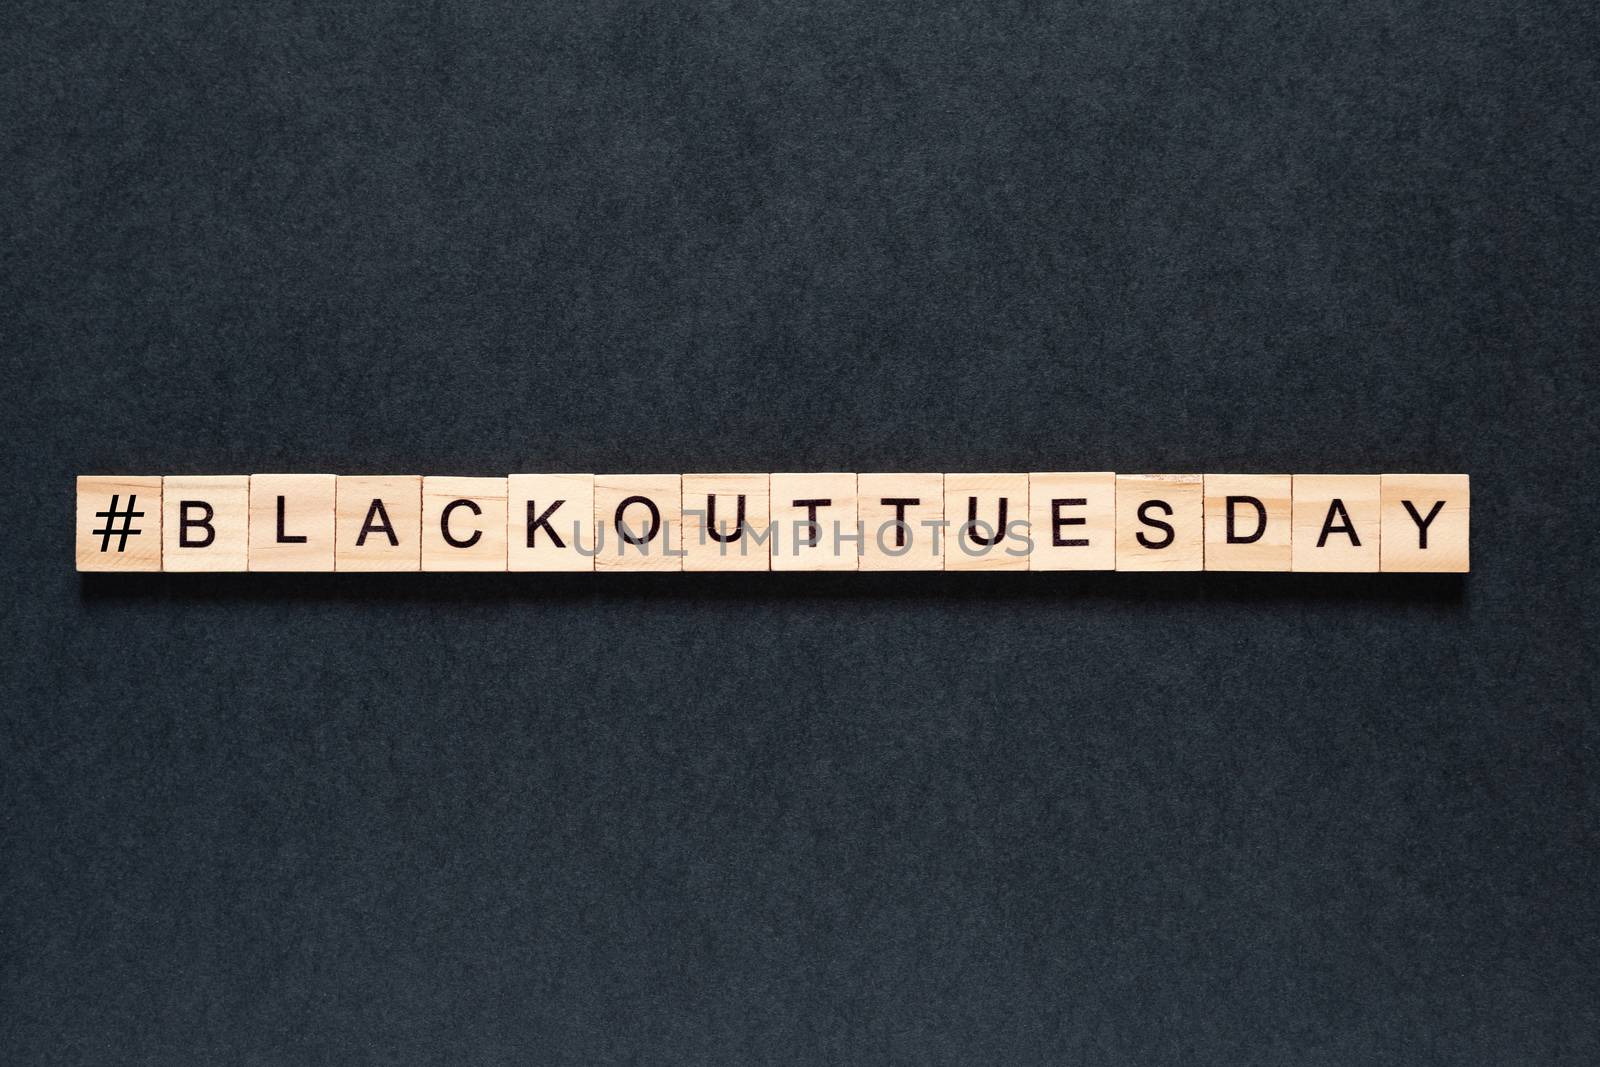 Blackout tuesday inscription on a black background. Black lives matter, blackout tuesday 2020 concept. unrest. rallies. brigandage. looting. marauders.